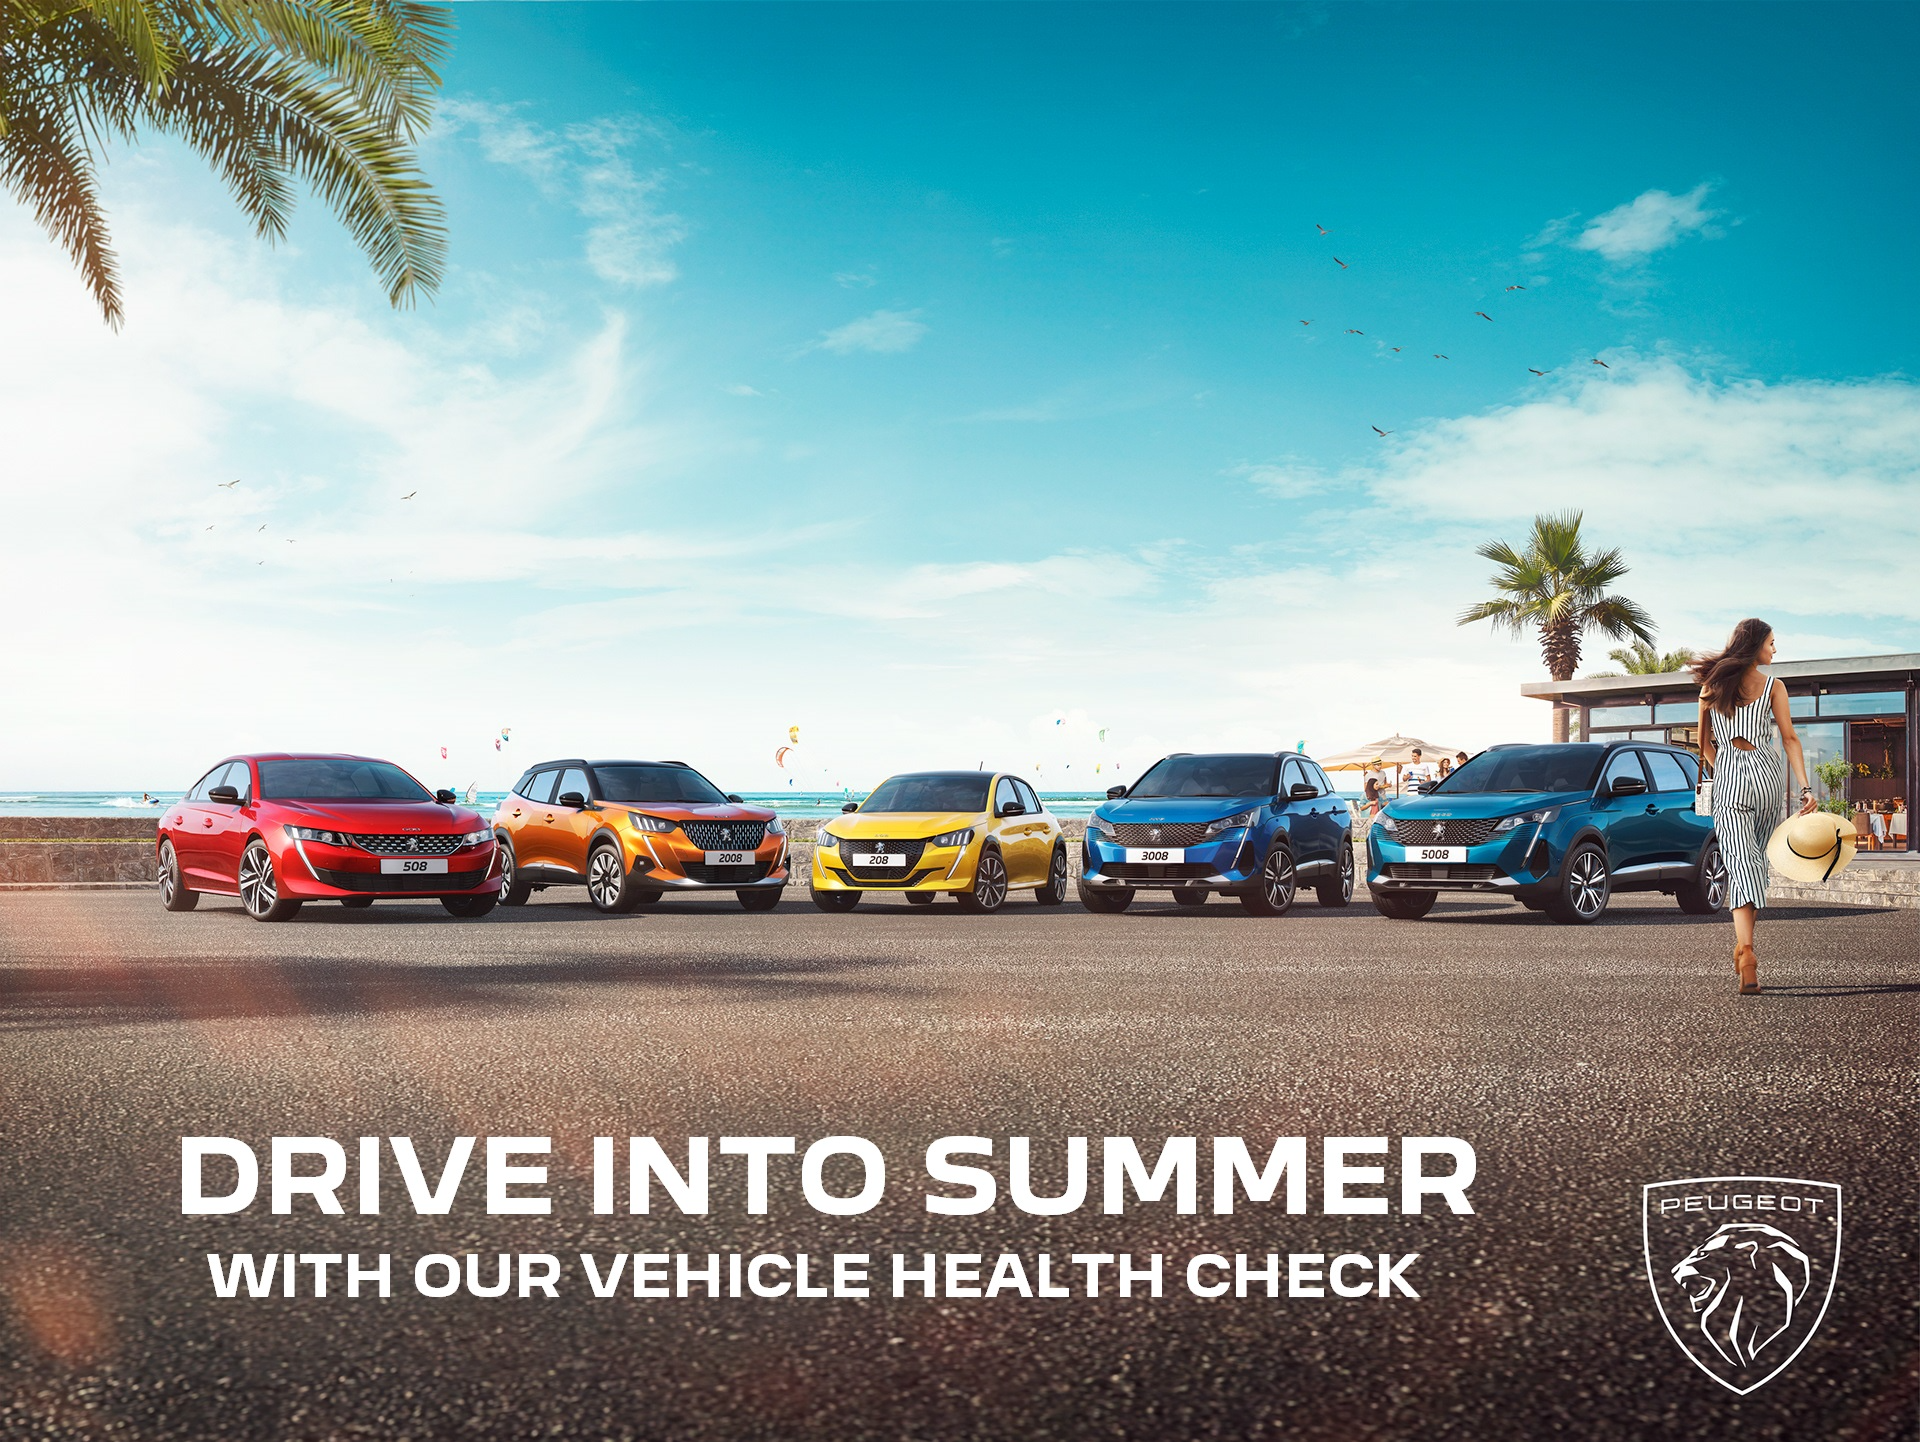 Get your car “Summer ready” with our Safety Check offers